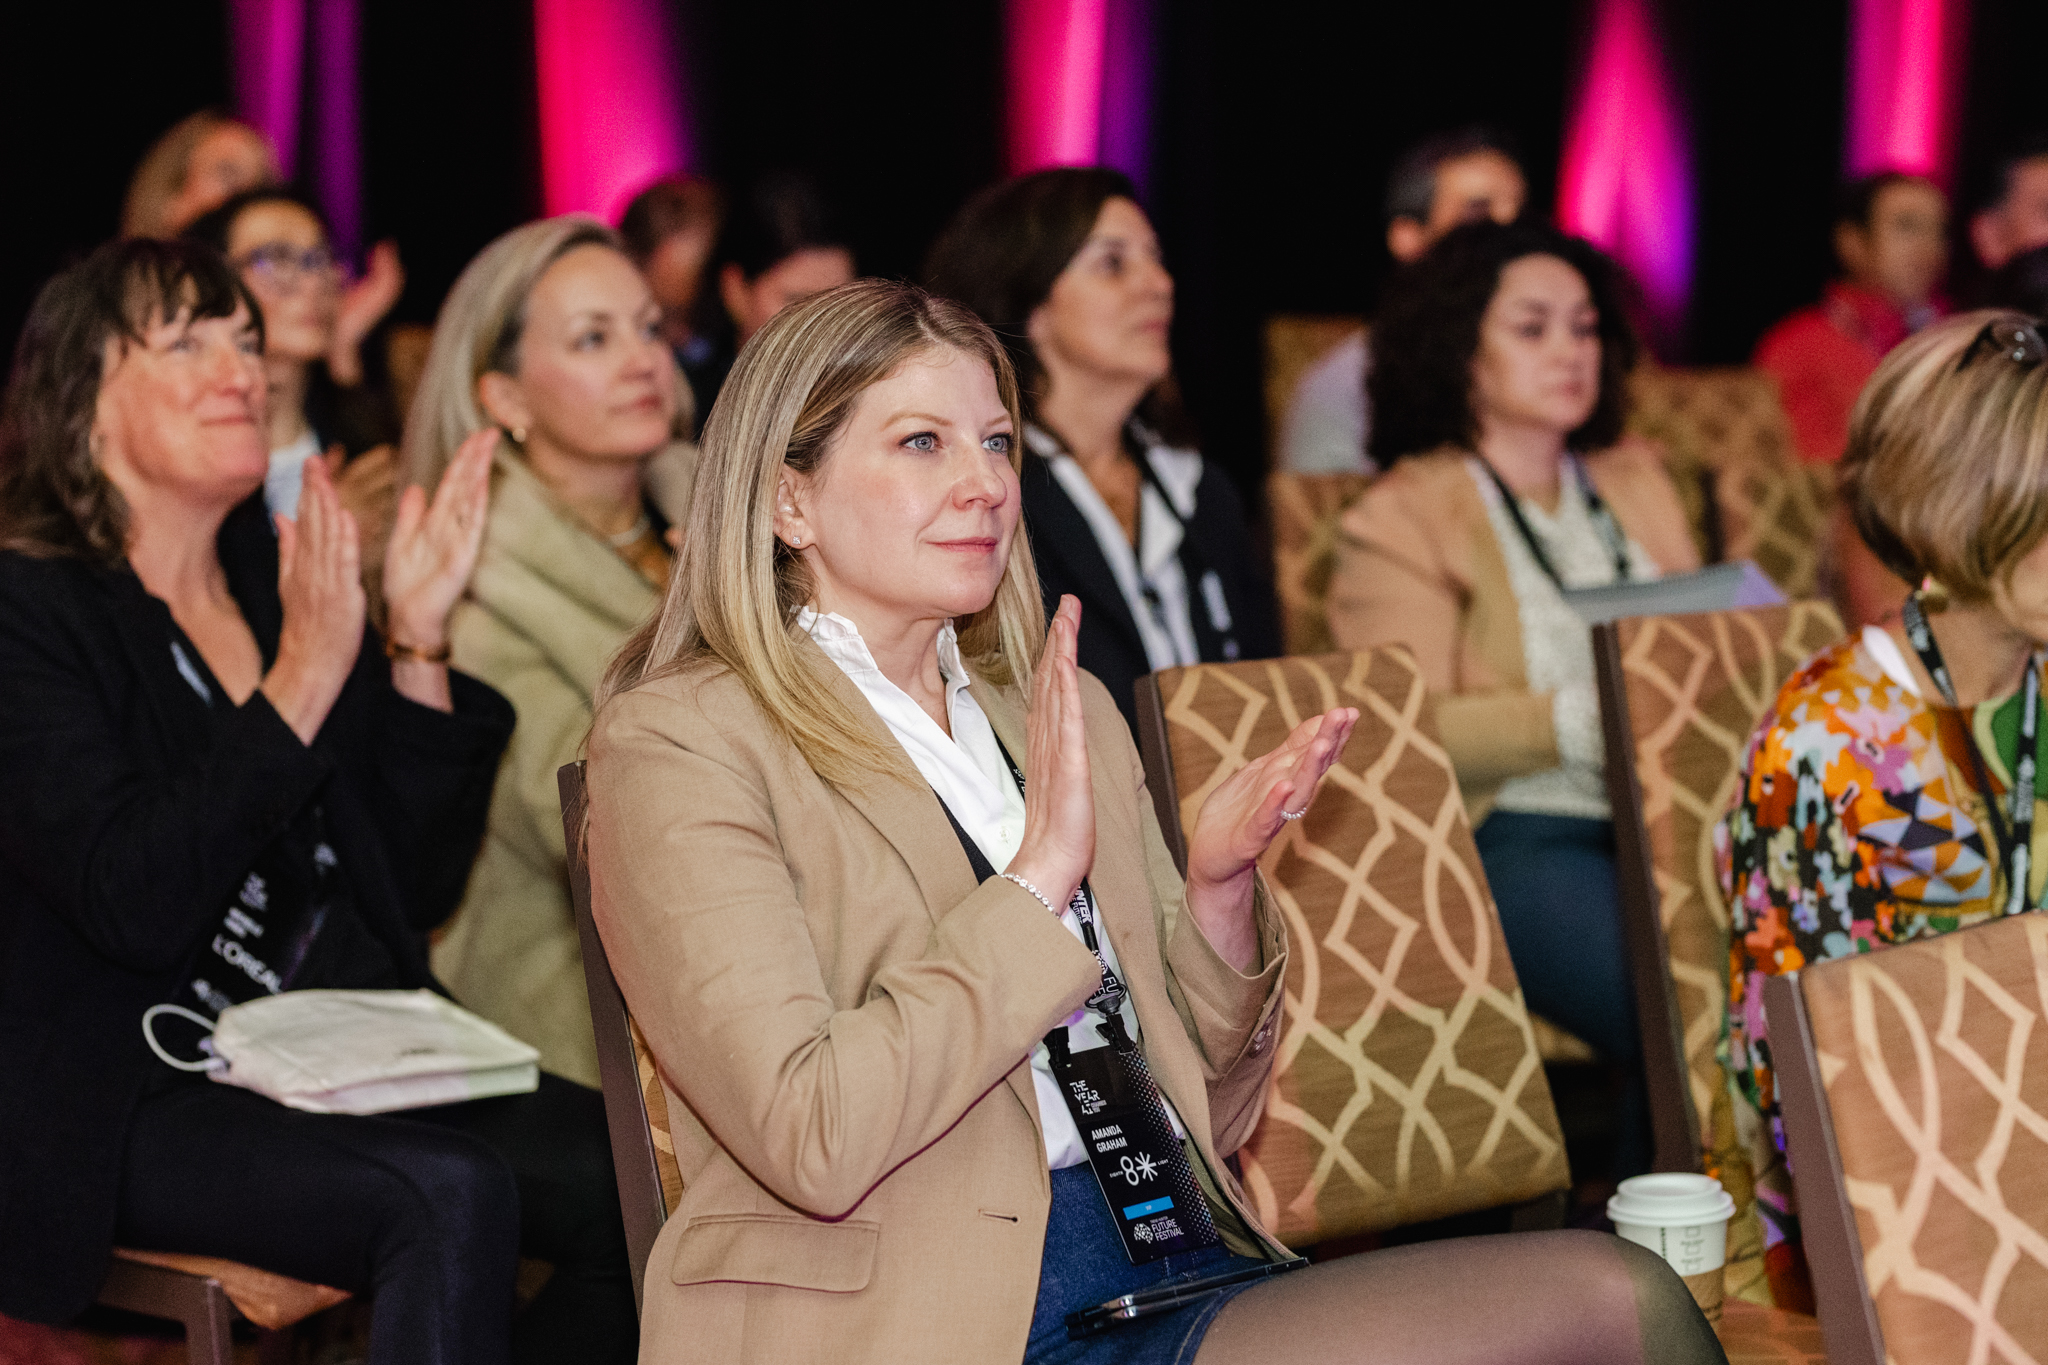 An event photography capturing a group of women clapping at a conference.